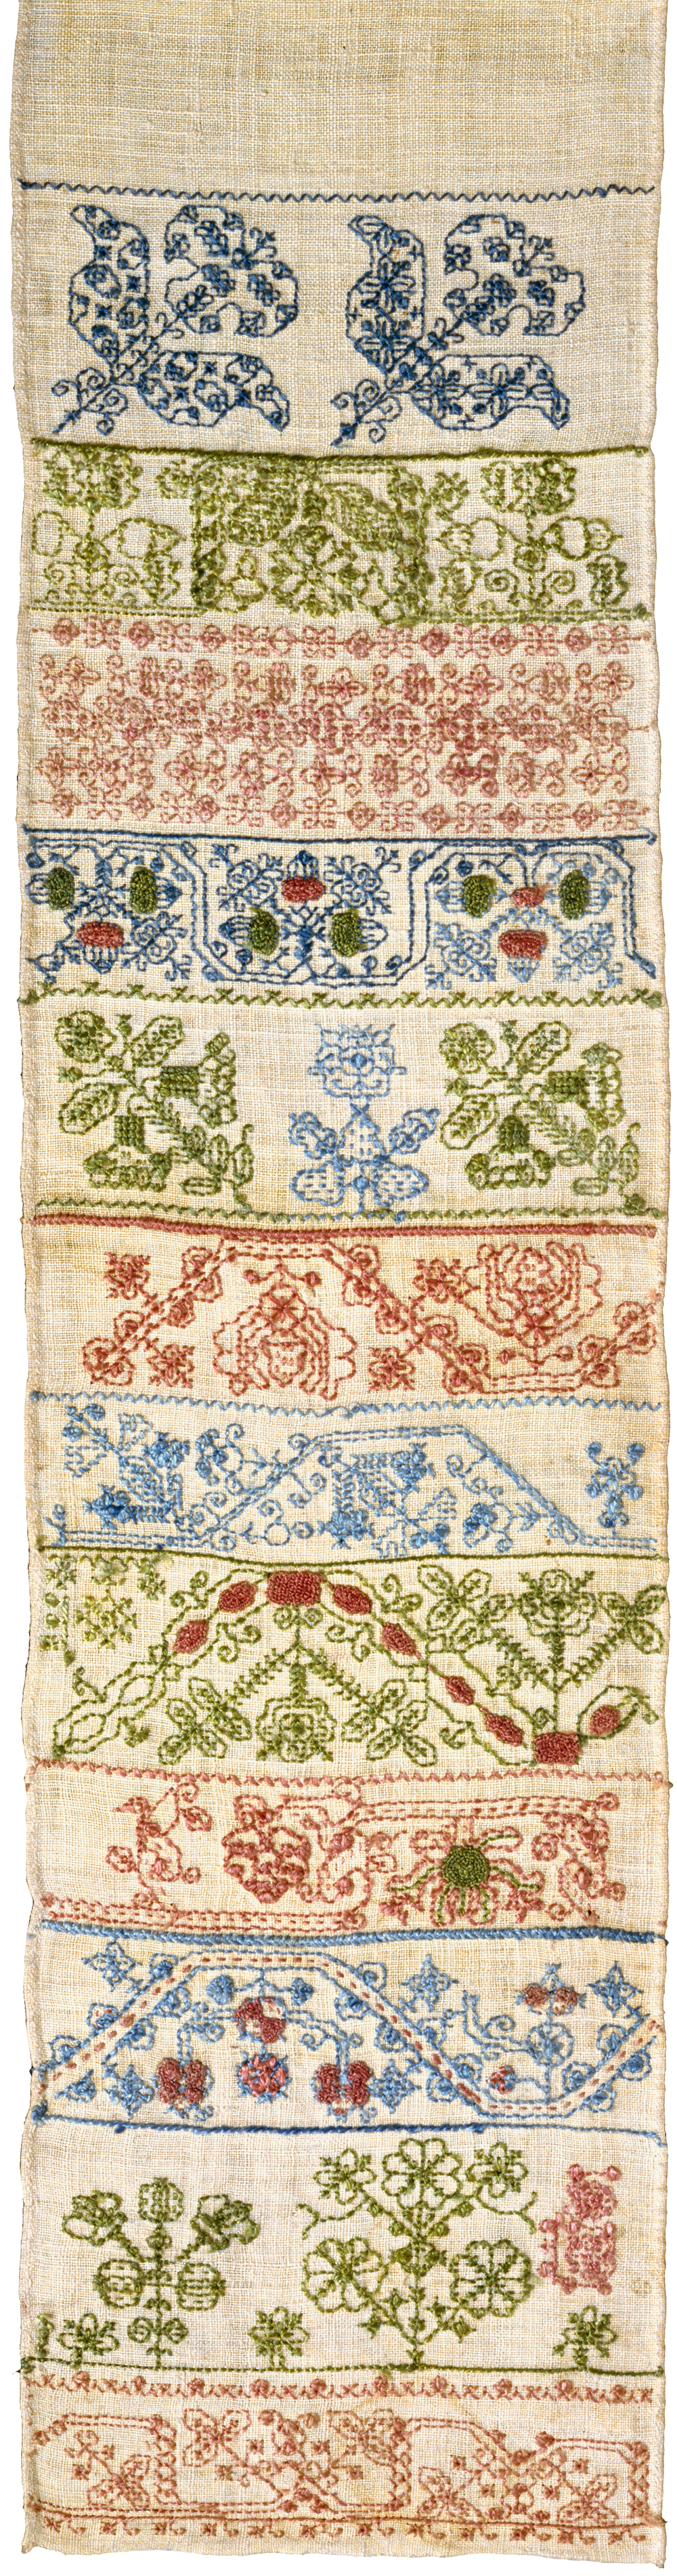 Turkish Embroidery Patterns A History Of Samplers Victoria And Albert Museum